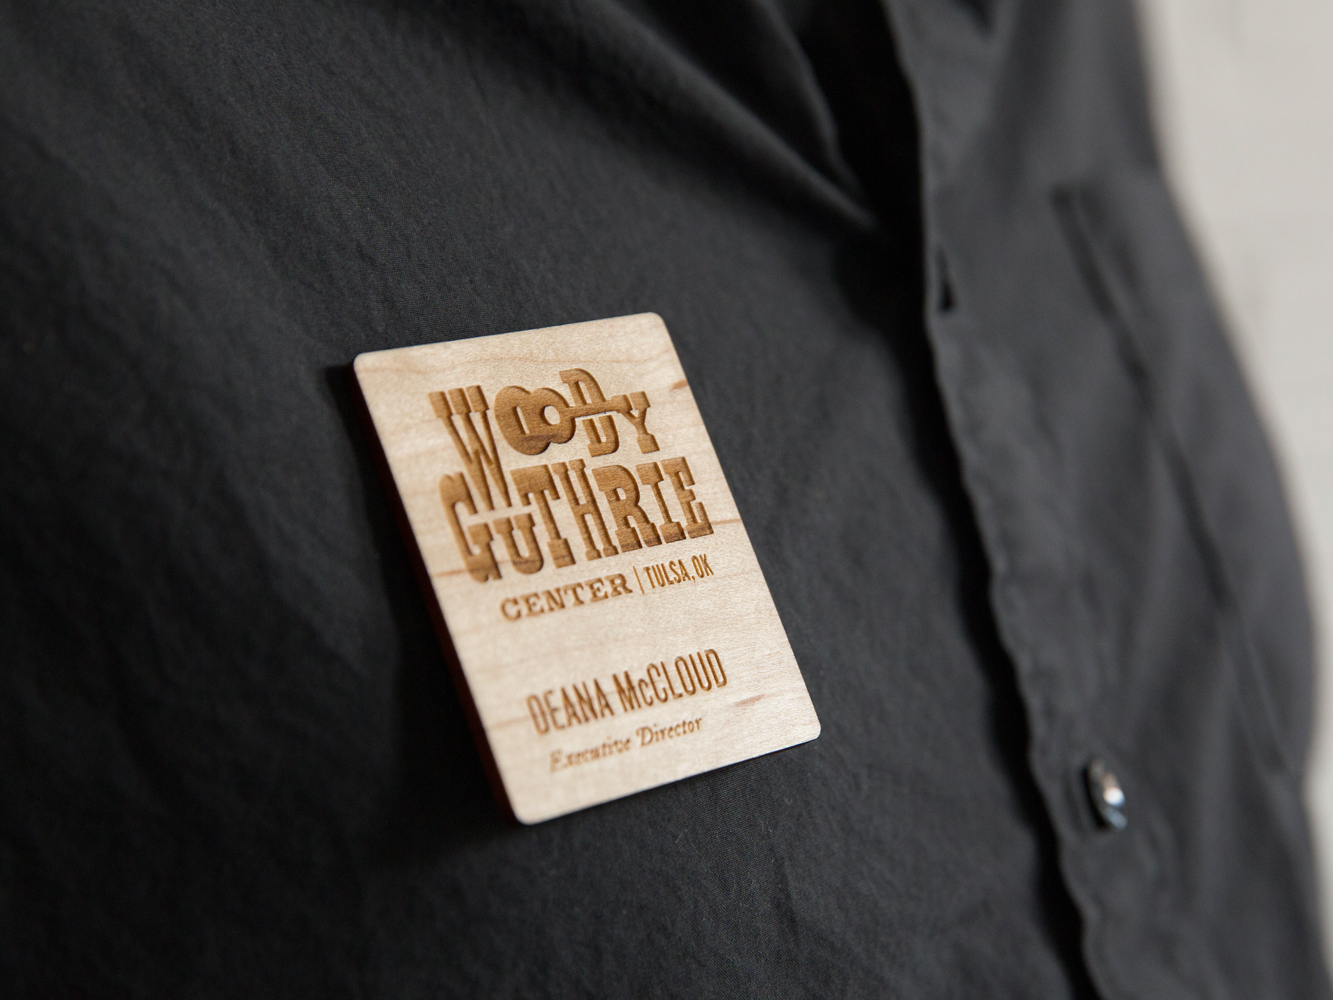 Wooden Woody Guthrie Center name tag